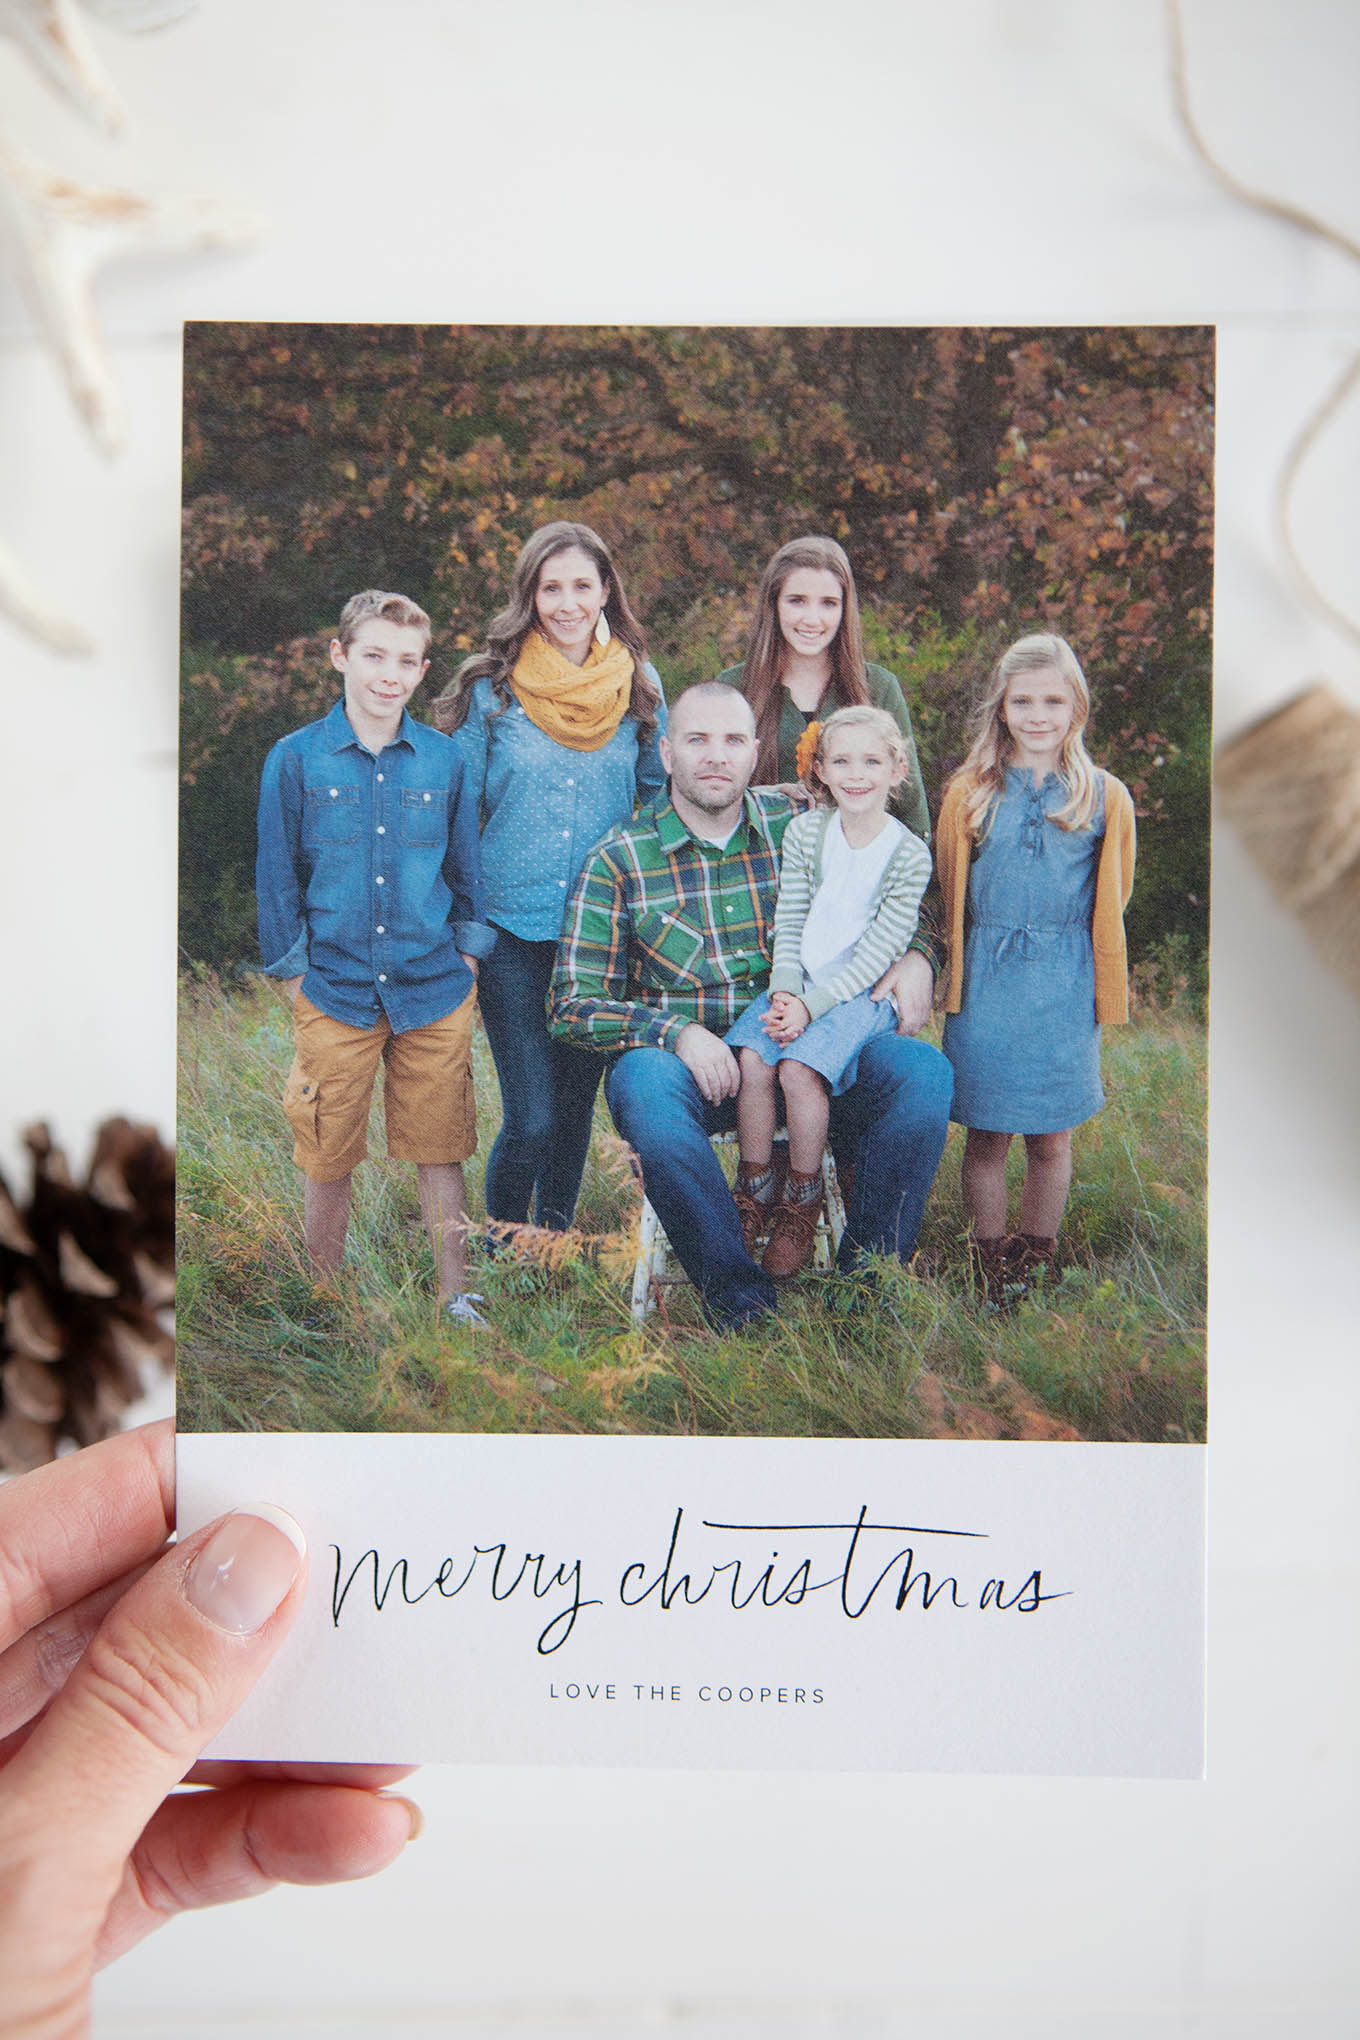 In this day of instant messages and overflowing inboxes, a handwritten card can mean so much. Sending heartfelt holiday cards is a tradition worth holding onto.